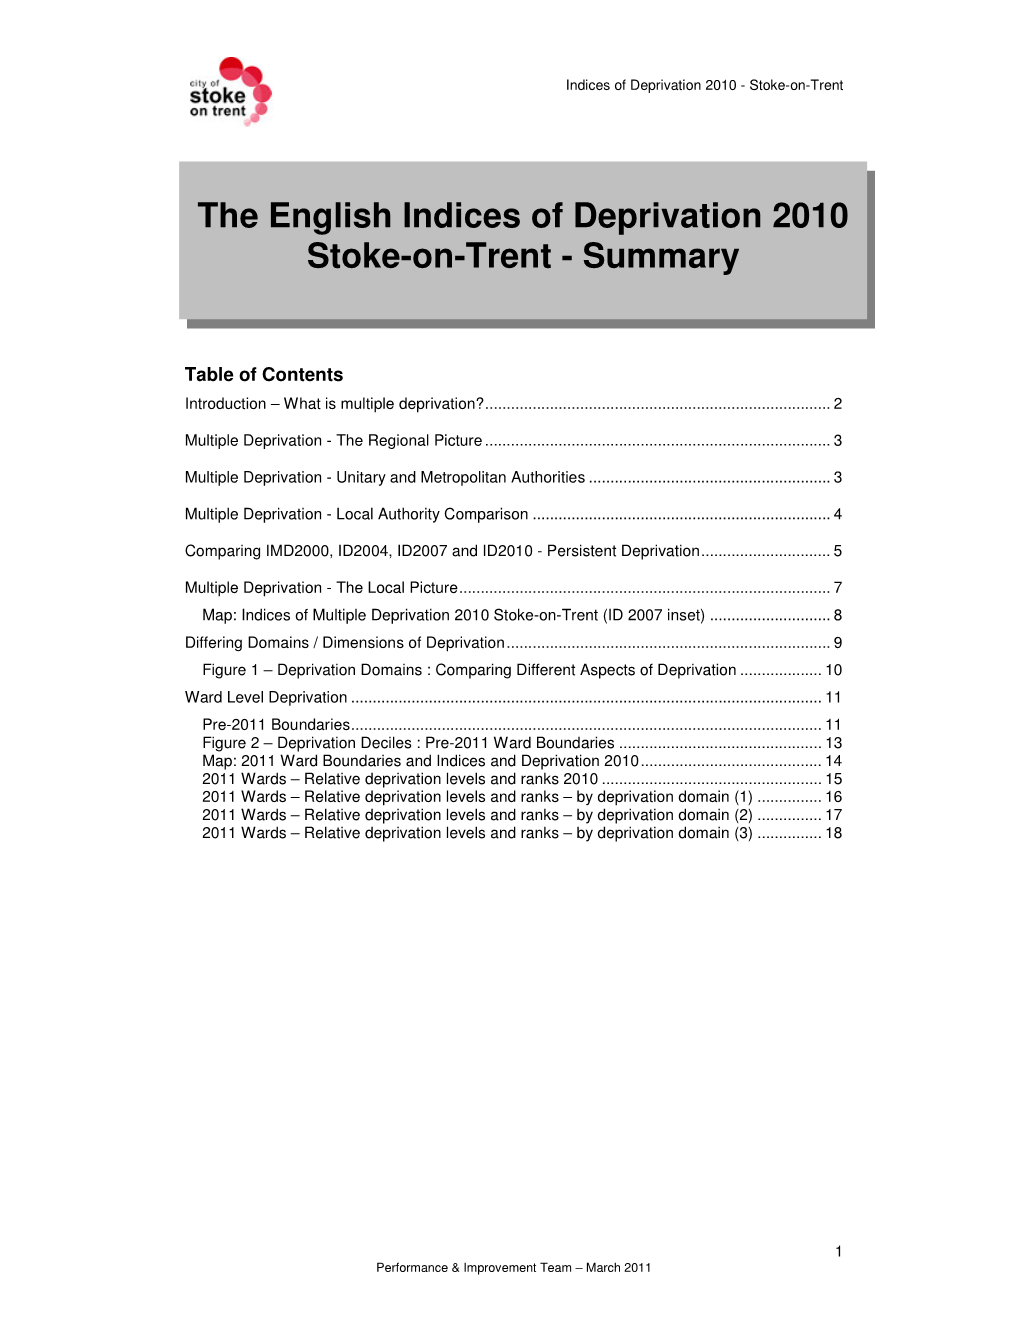 The English Indices of Deprivation 2010 Stoke-On-Trent